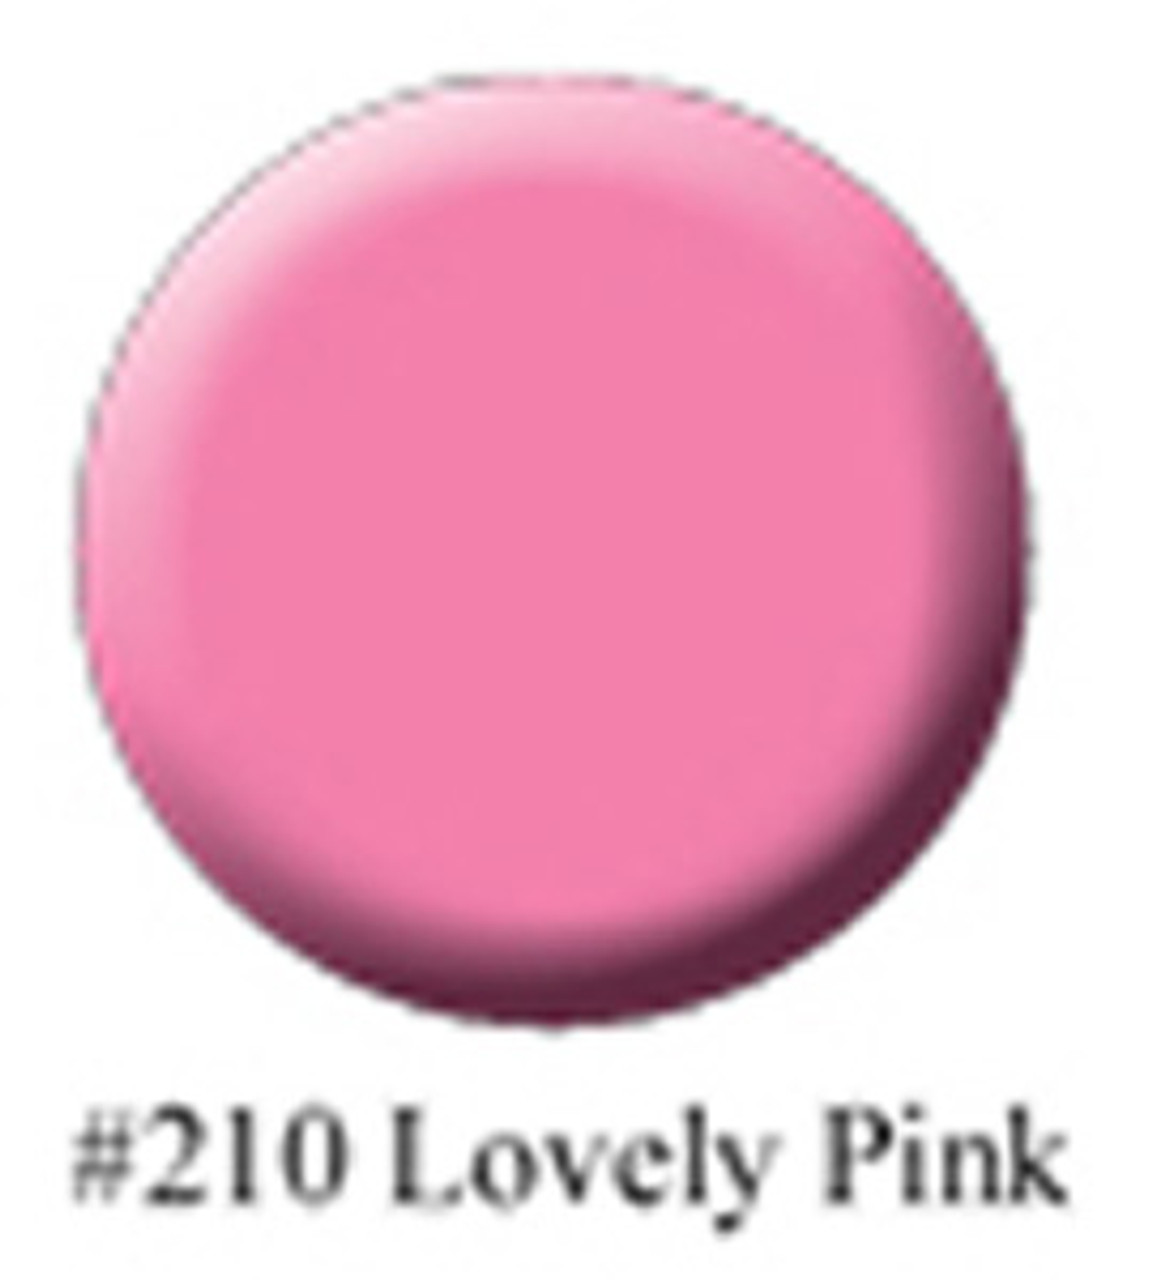 BASIC ONE - Gelacquer Lovely Pink - 1/4oz